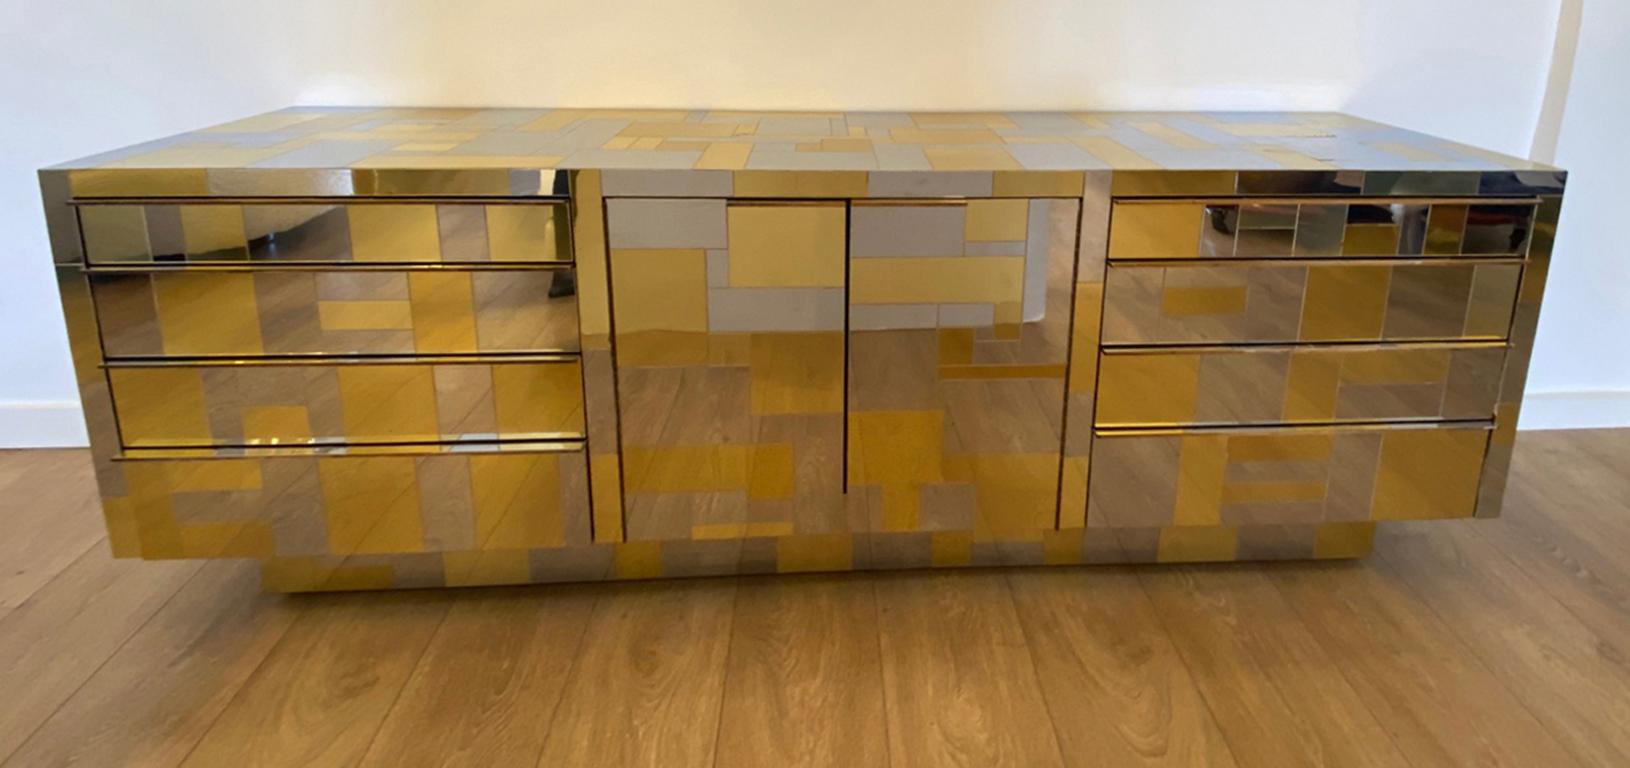 Large brass and chrome sideboard by Paul Evans from the Cityscape Collection for Directional, circa 1970's
All chrome and brass tiles mosaic patchwork, 
Rare design combines on:
Either side flanking four set of drawers, 
Pair of double door in